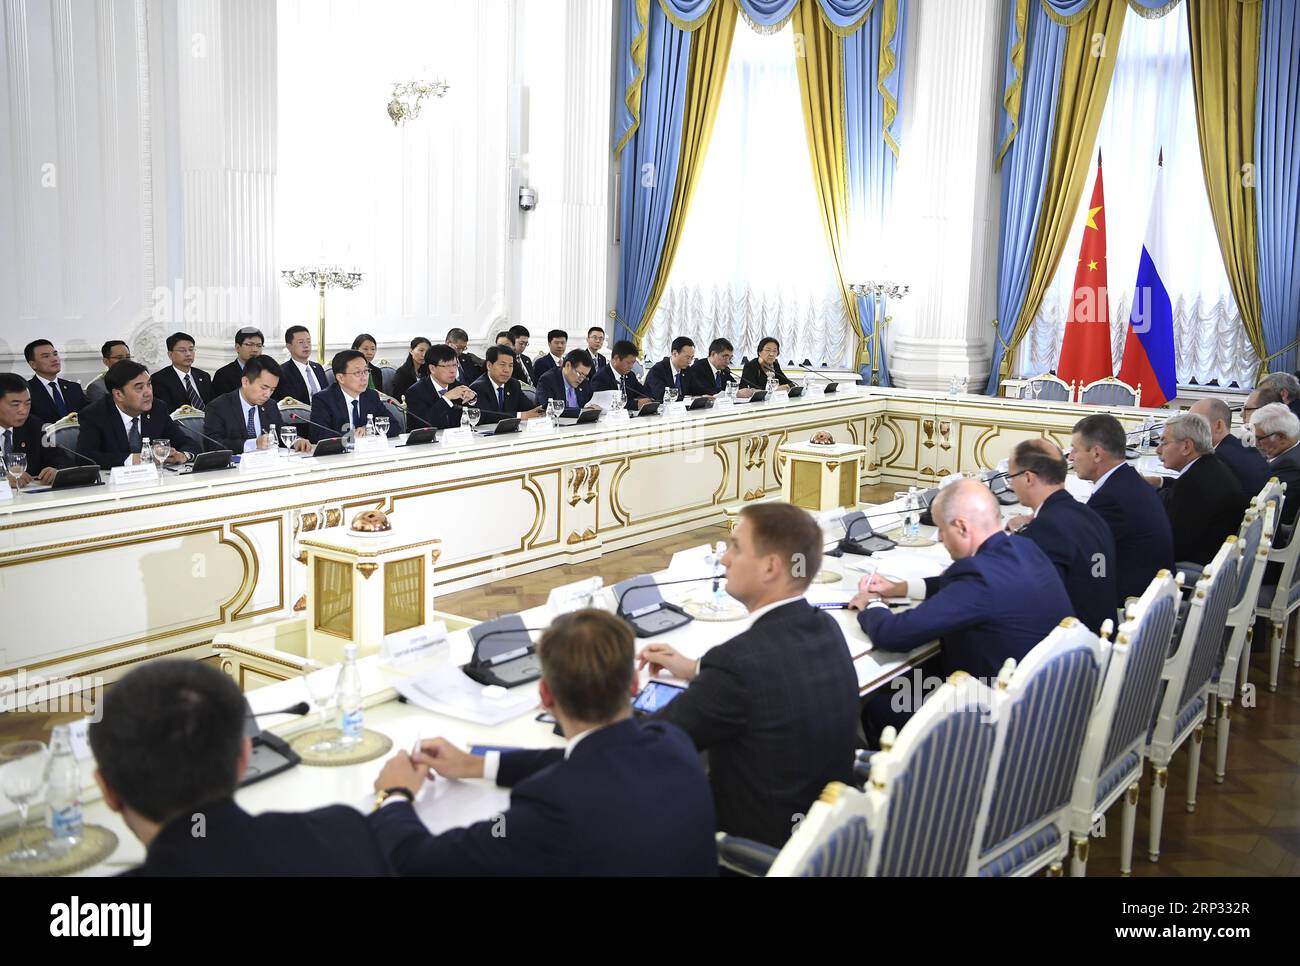 (180918) -- MOSCOW, Sept. 18, 2018 -- Chinese Vice Premier Han Zheng, also a member of the Standing Committee of the Political Bureau of the Communist Party of China (CPC) Central Committee, meets with Russian Deputy Prime Minister Dmitry Kozak in Moscow, Russia, Sept. 17, 2018. Han and Kozak co-chaired the 15th meeting of the China-Russia Energy Cooperation Committee in Moscow on Monday. )(mcg) RUSSIA-CHINA-HAN ZHENG-DMITRY KOZAK-MEETING YanxYan PUBLICATIONxNOTxINxCHN Stock Photo